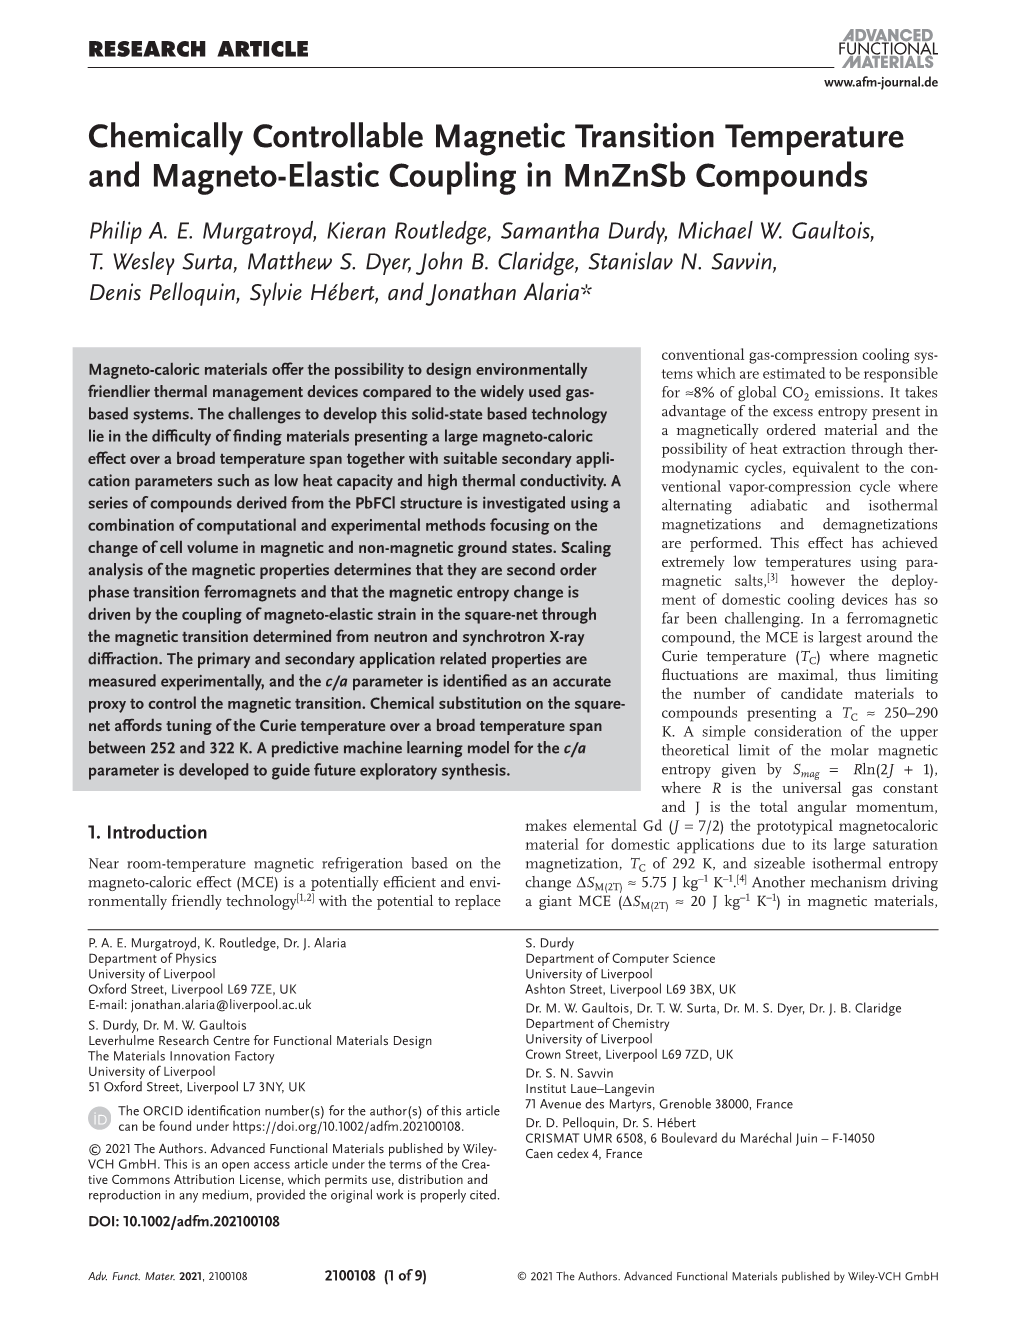 Chemically Controllable Magnetic Transition Temperature and Magneto-Elastic Coupling in Mnznsb Compounds